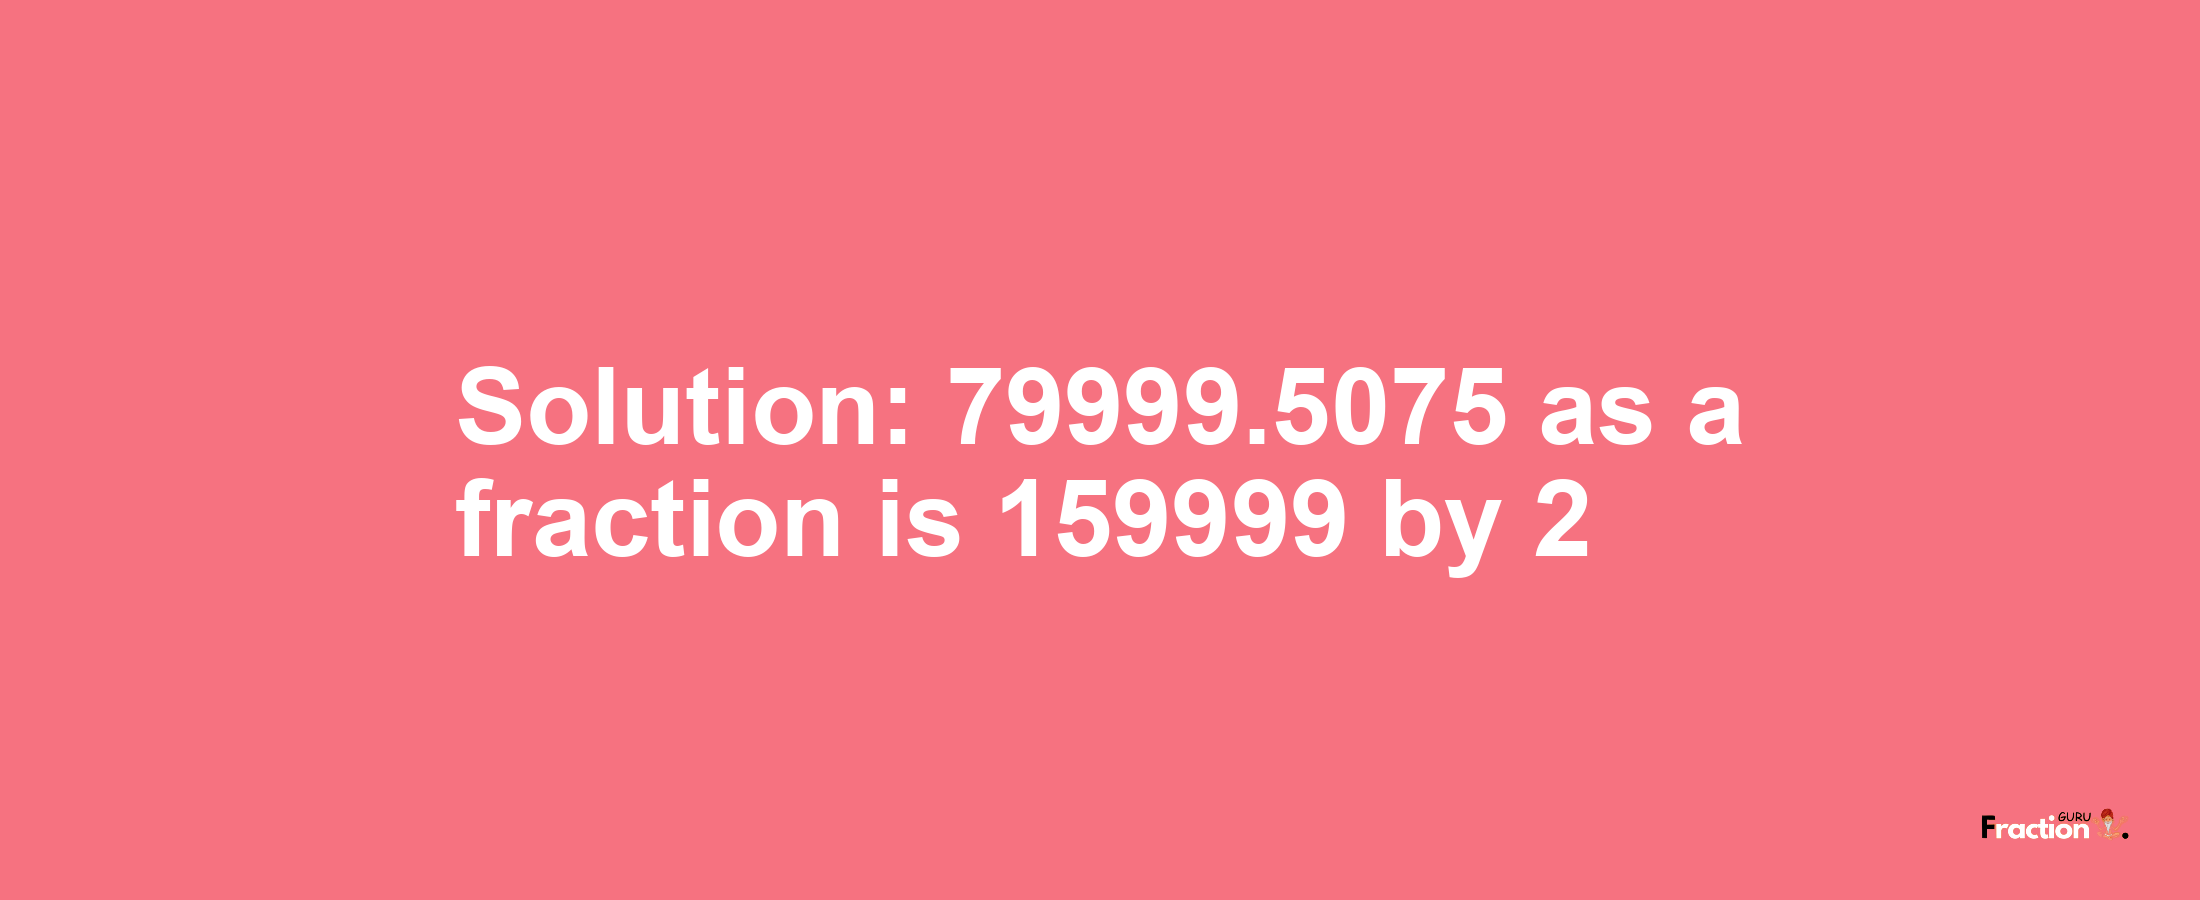 Solution:79999.5075 as a fraction is 159999/2